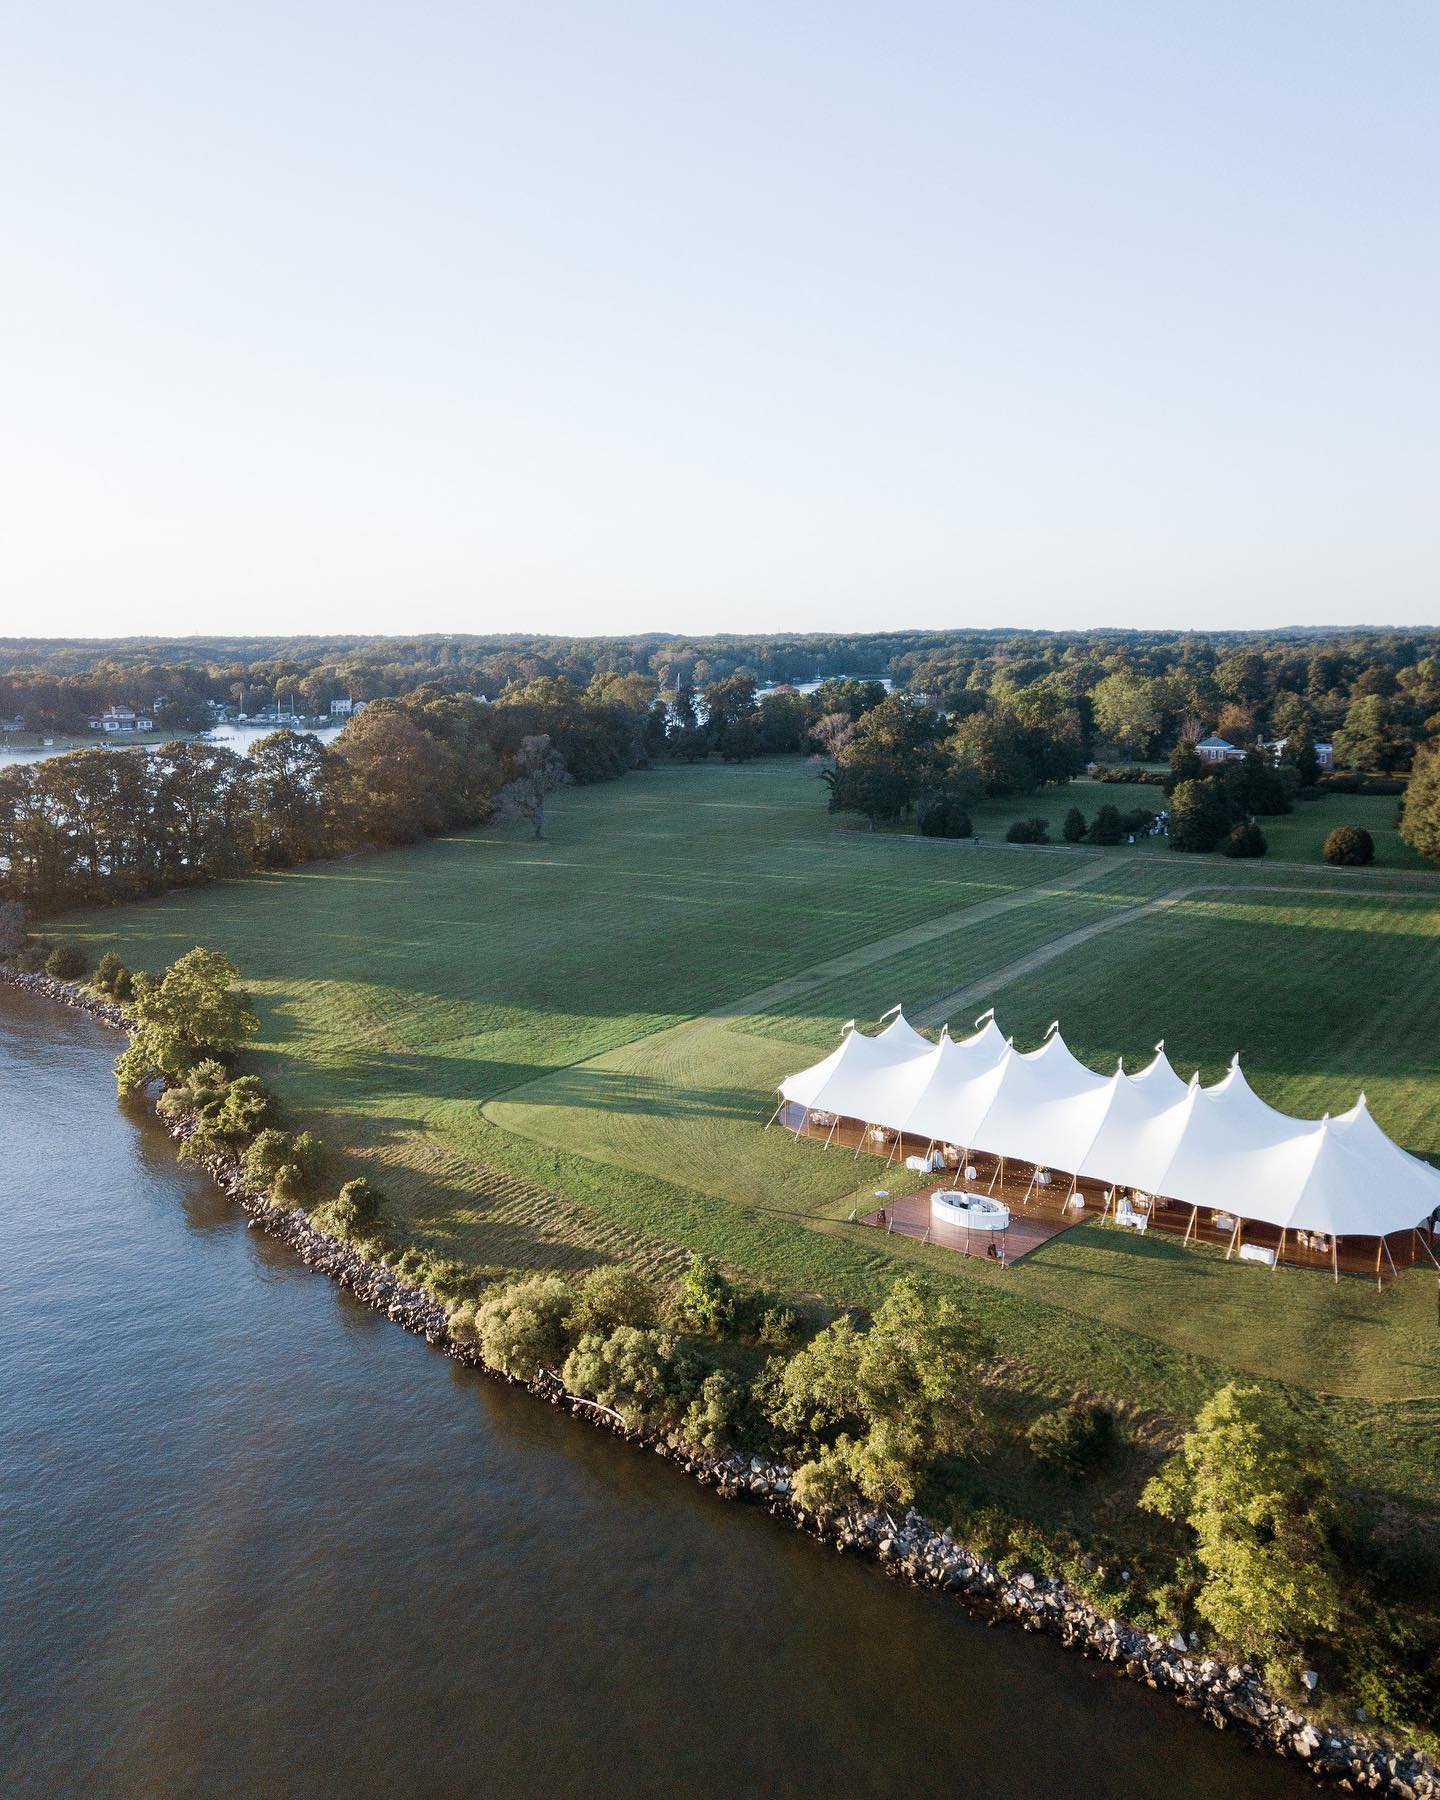 A wedding evening under the tent is one well spent. Swipe to see how we took this reception from day to night.

Planning &amp; Design: @rroseevents
Photography: @corbingurkin 
Videography: @claytonfilmco 
Venue: @whitehalleventsmd 
Catering &amp; Cak